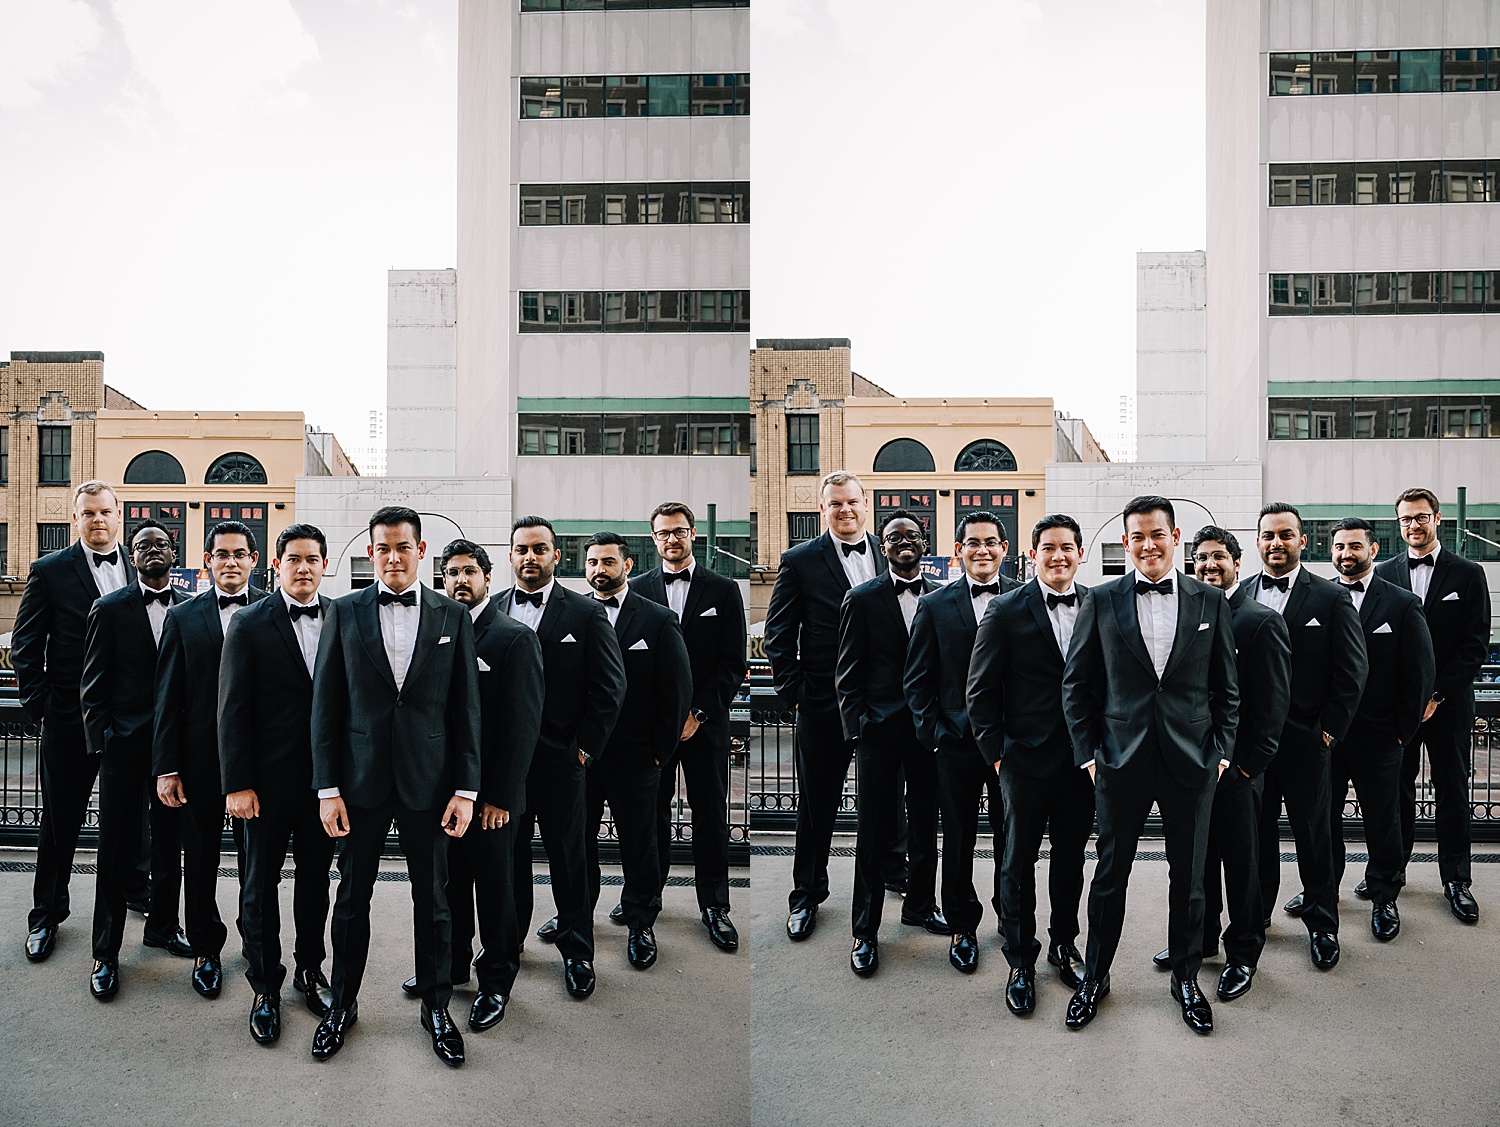 groomsmen wearing bowties and black dress shoes on wedding day at the rice